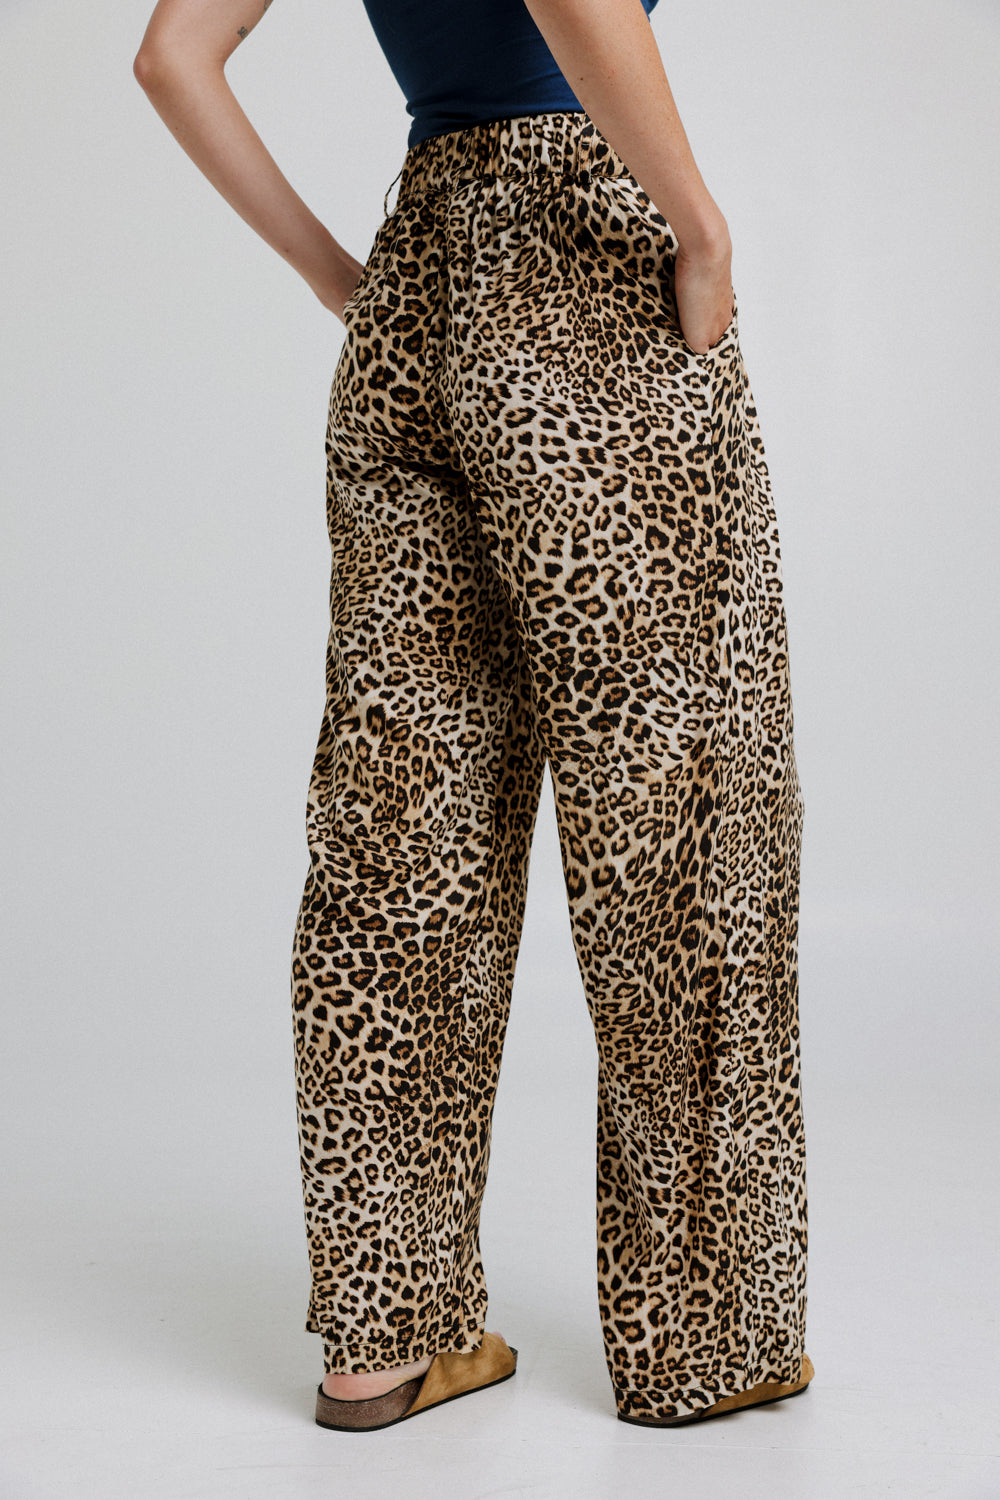 Look At These Leopard Bottoms